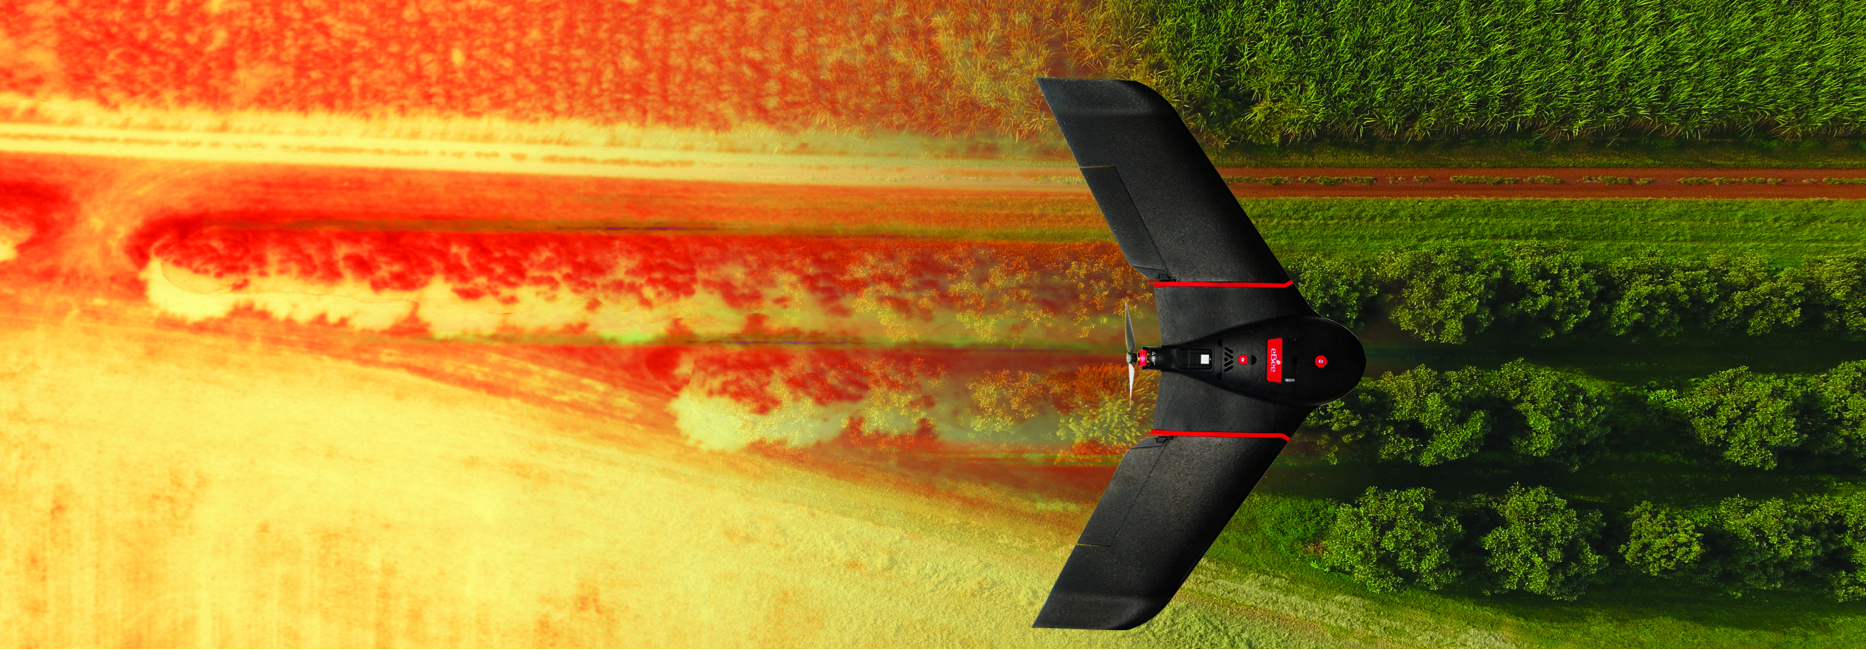 Red fixed-wing drone flying over field aerial imagery of farm